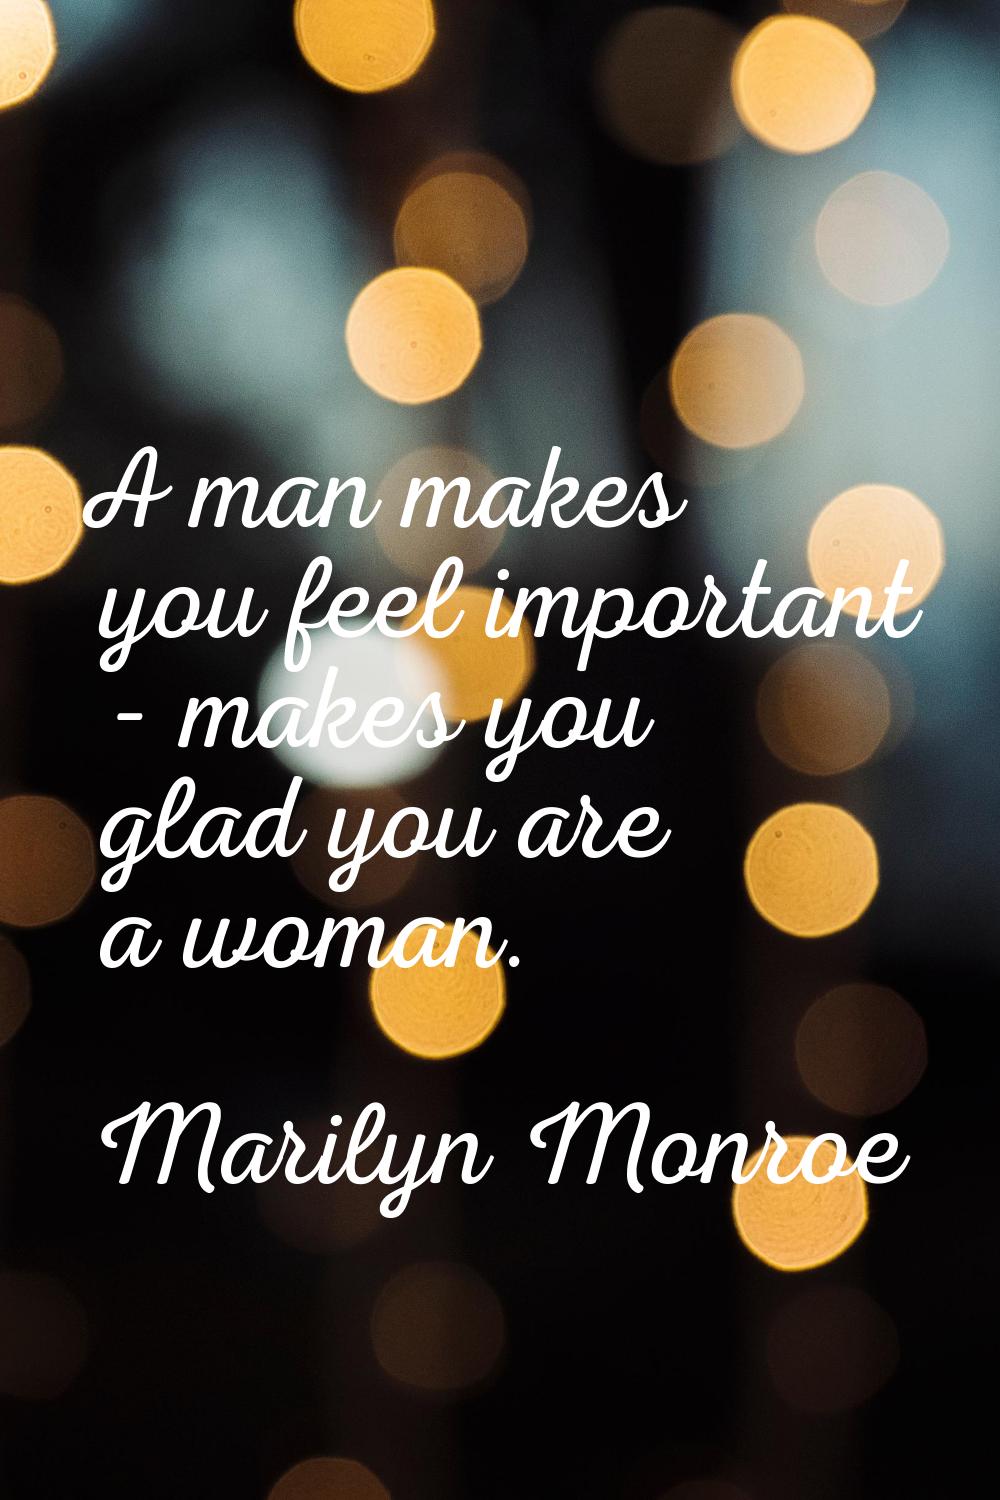 A man makes you feel important - makes you glad you are a woman.